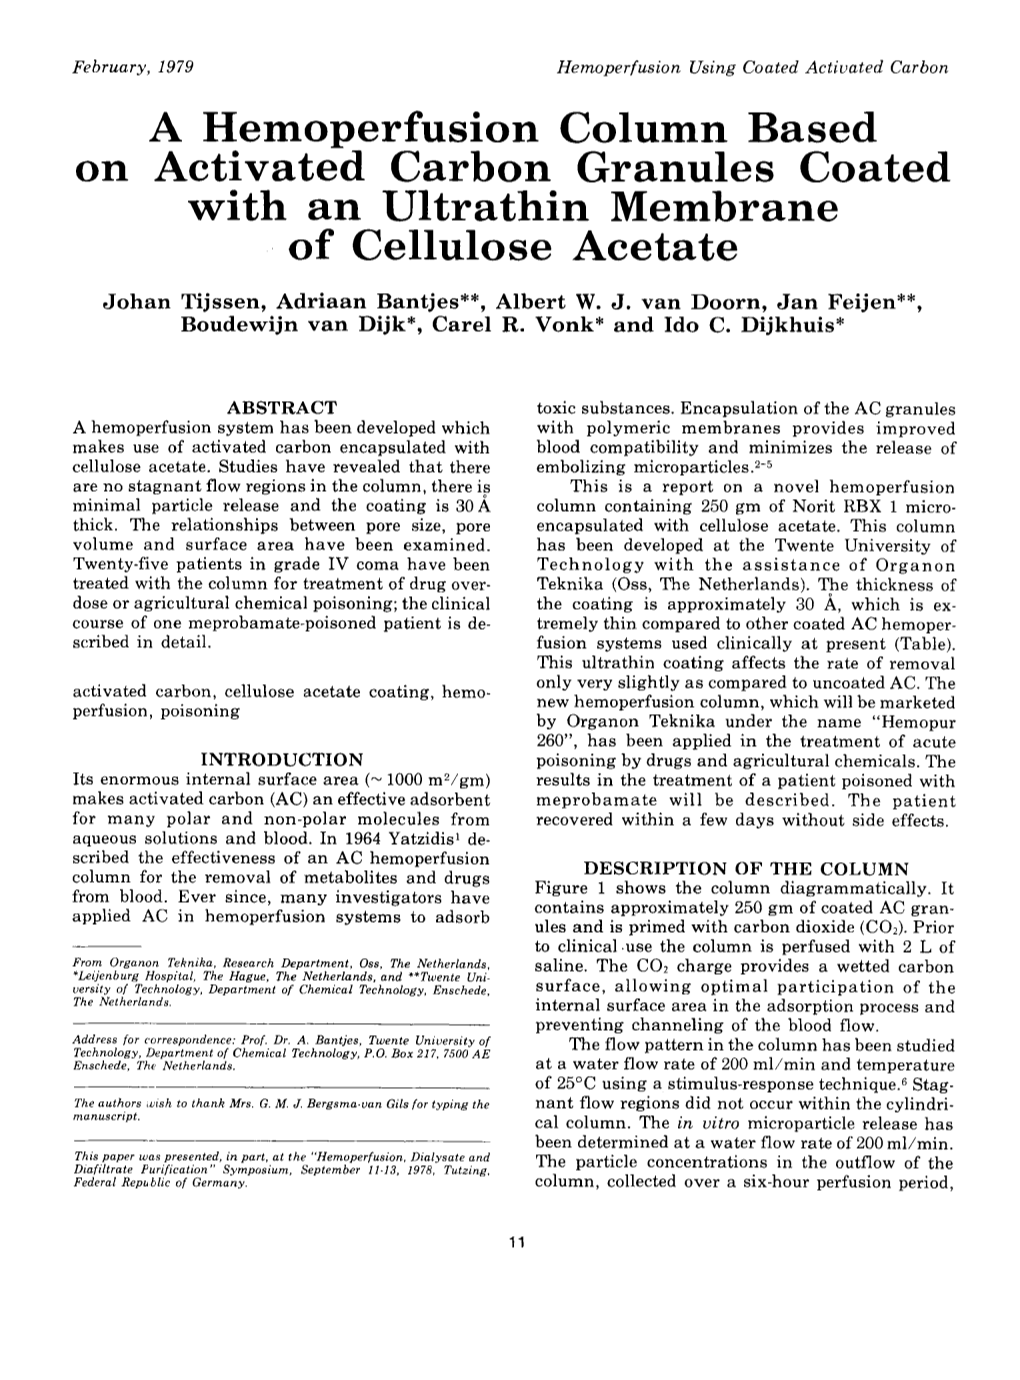 A Hemoperfusion Column Based on Activated Carbon Granules Coated with an Ultrathin Membrane of Cellulose Acetate Johan Tijssen, Adriaan Bantjes"", Albert W